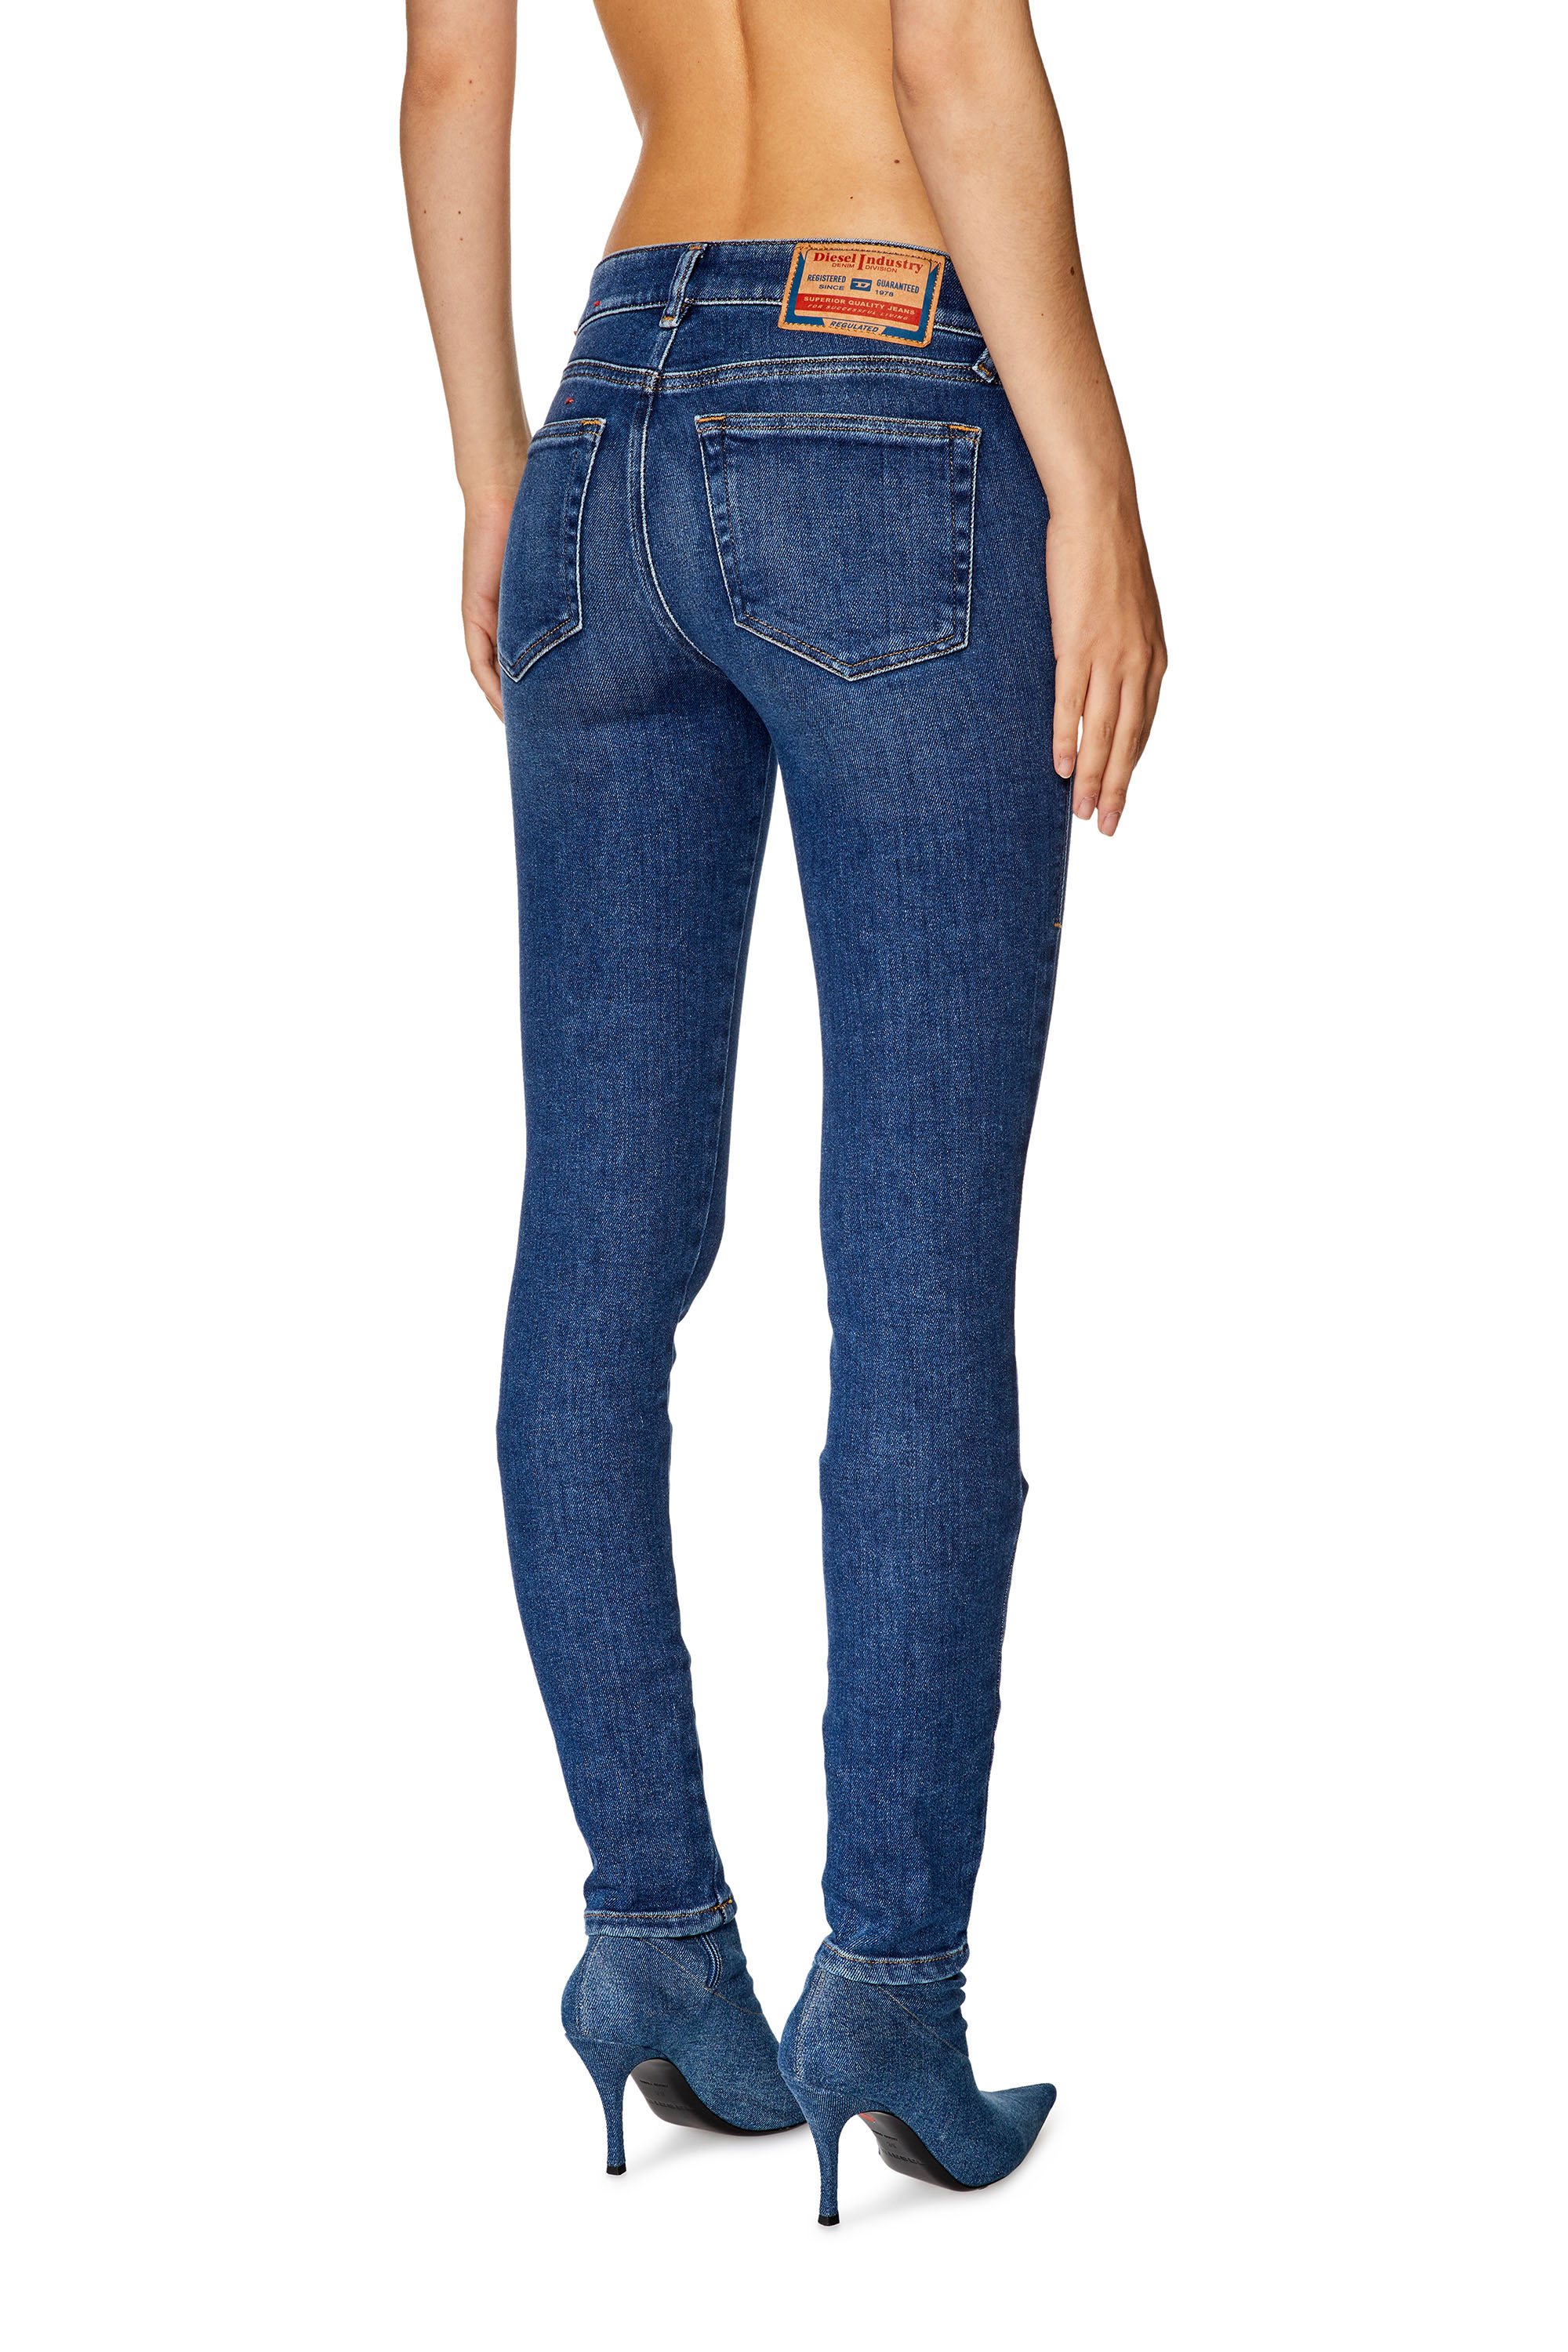 klodset Kemi spin Women's Super Skinny Jeans: Fitted, Tight, Comfortable | Diesel®